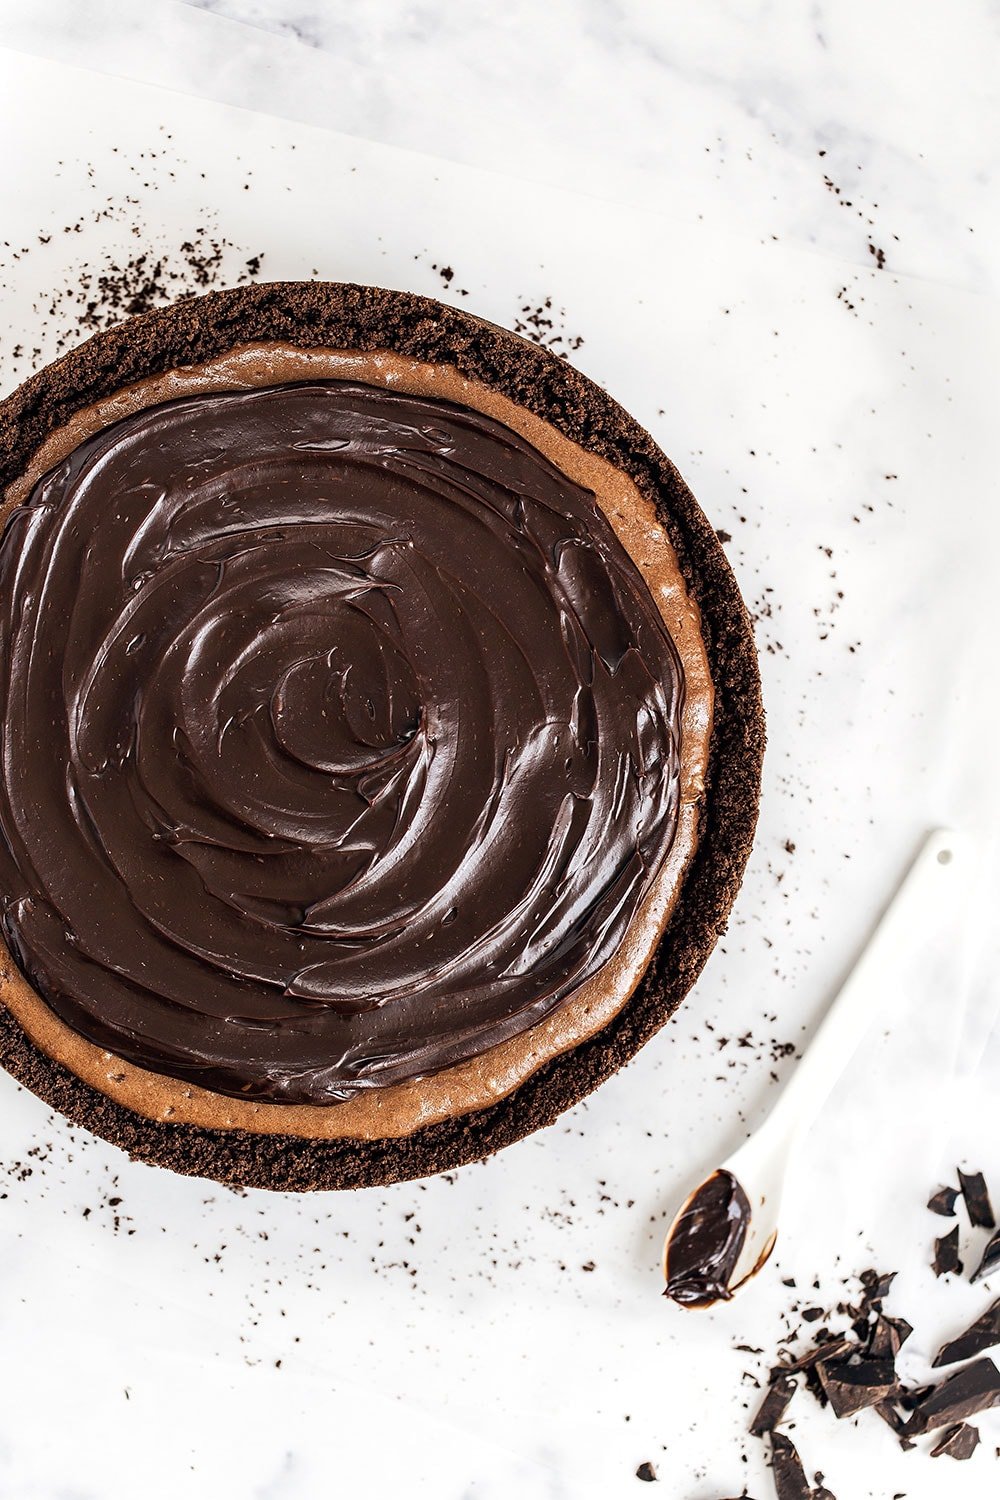 Insanely decadent Death by Chocolate Cheesecake features chocolate in FOUR forms: chocolate cookie crust, double chocolate cheesecake filling, with a chocolate ganache topping. It doesn't get better than this!